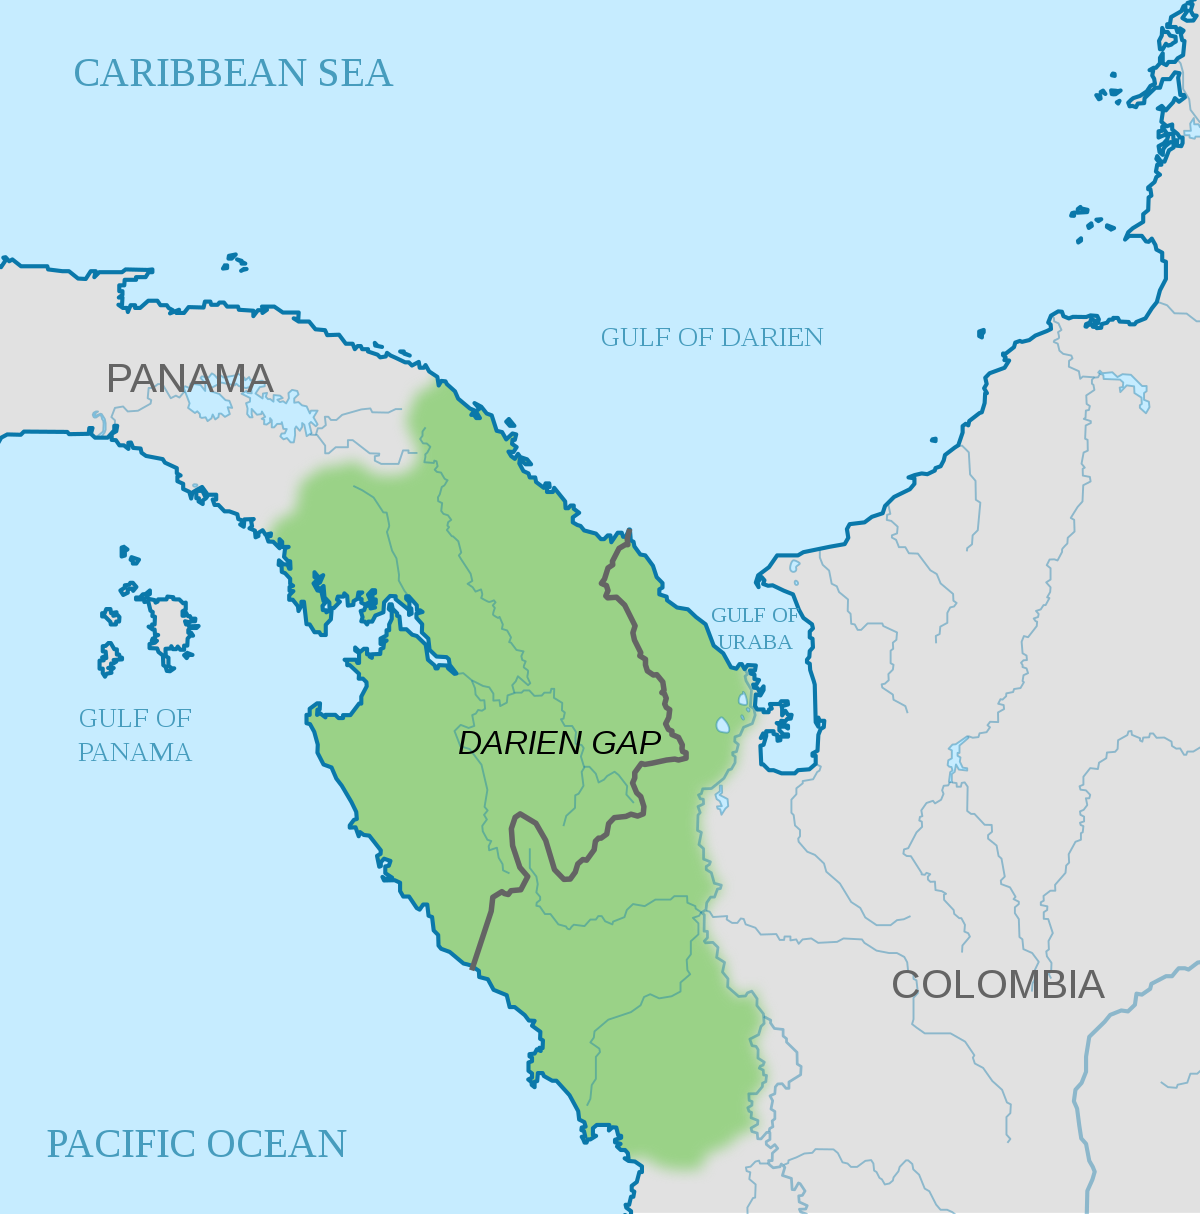  The Darién Gap is a break across the North and South American continents within Central America, consisting of a large watershed, forest, and mountains in the northern portion of Colombia's Chocó Department and Panama's Darién Province.